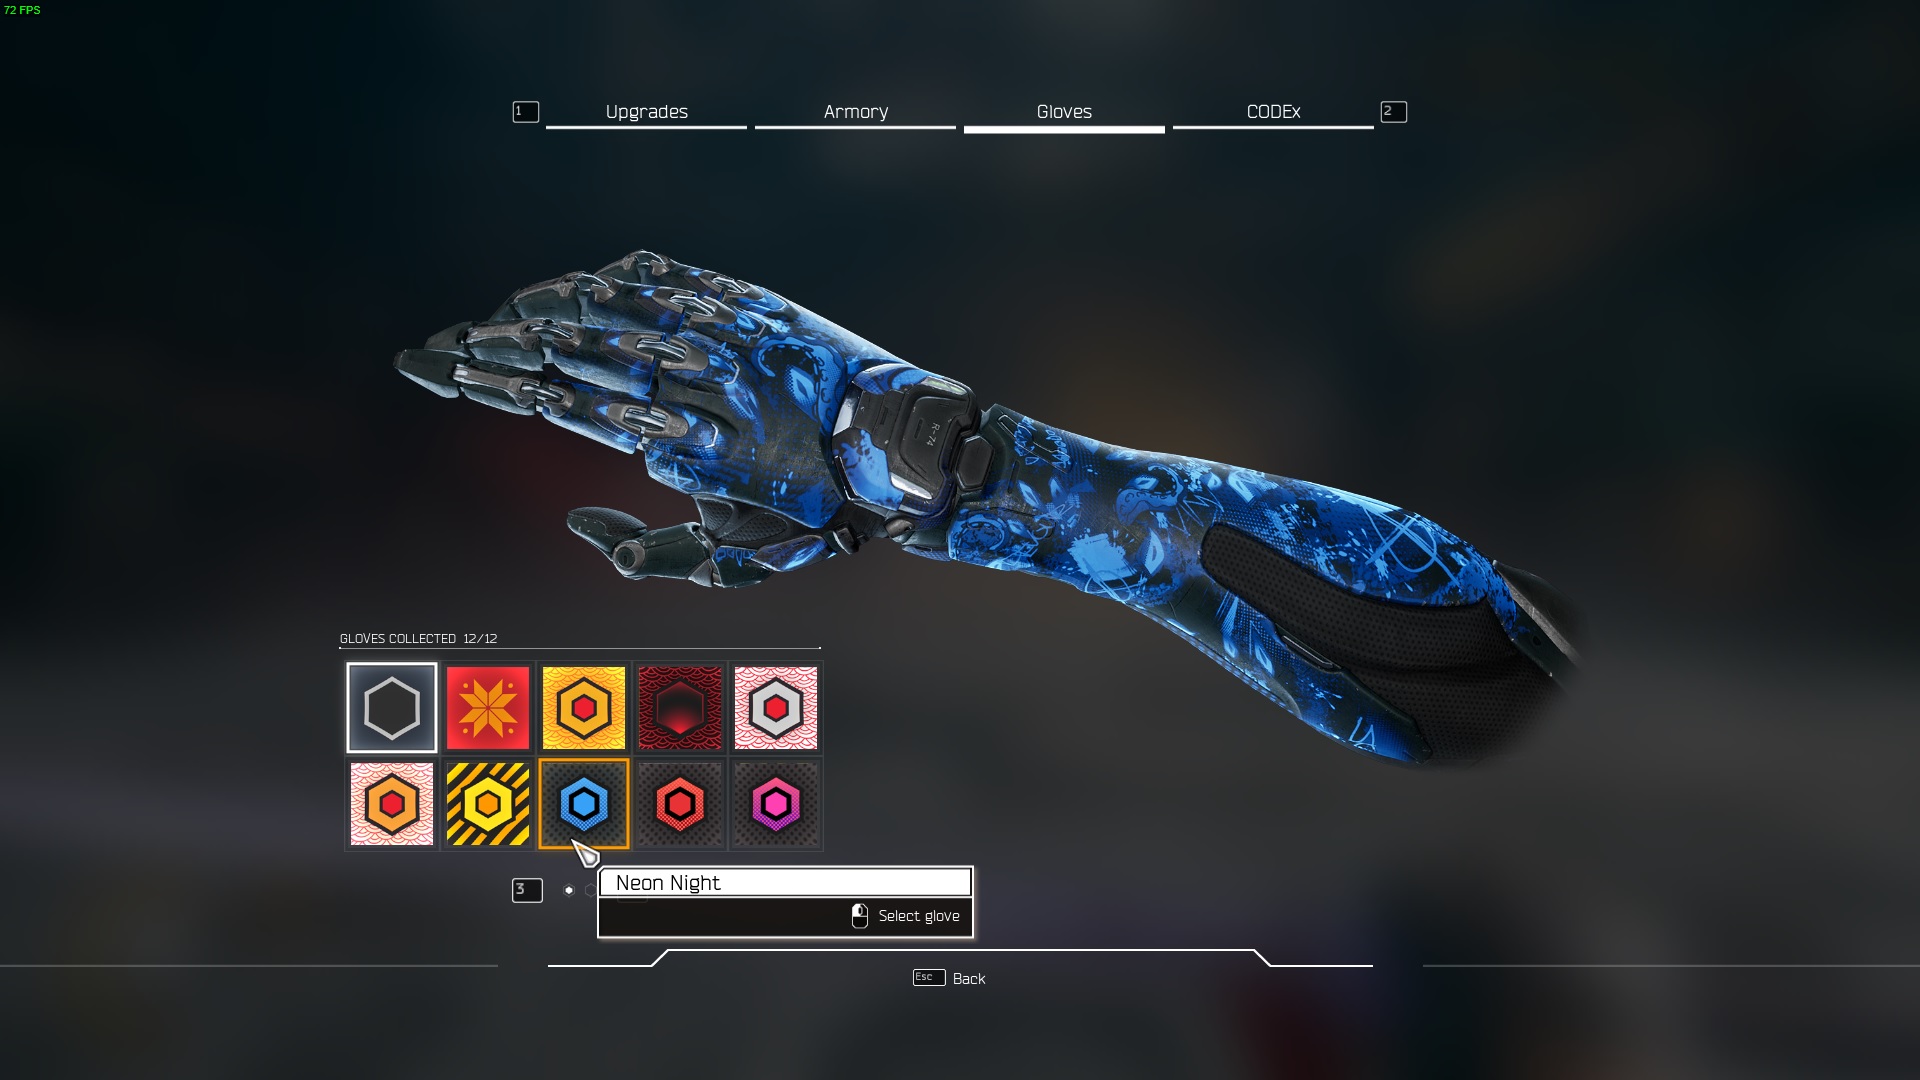 Ghostrunner - All Collectibles Details for All Swords and Gloves - Glove 8 - Neon Night - 5E0D509